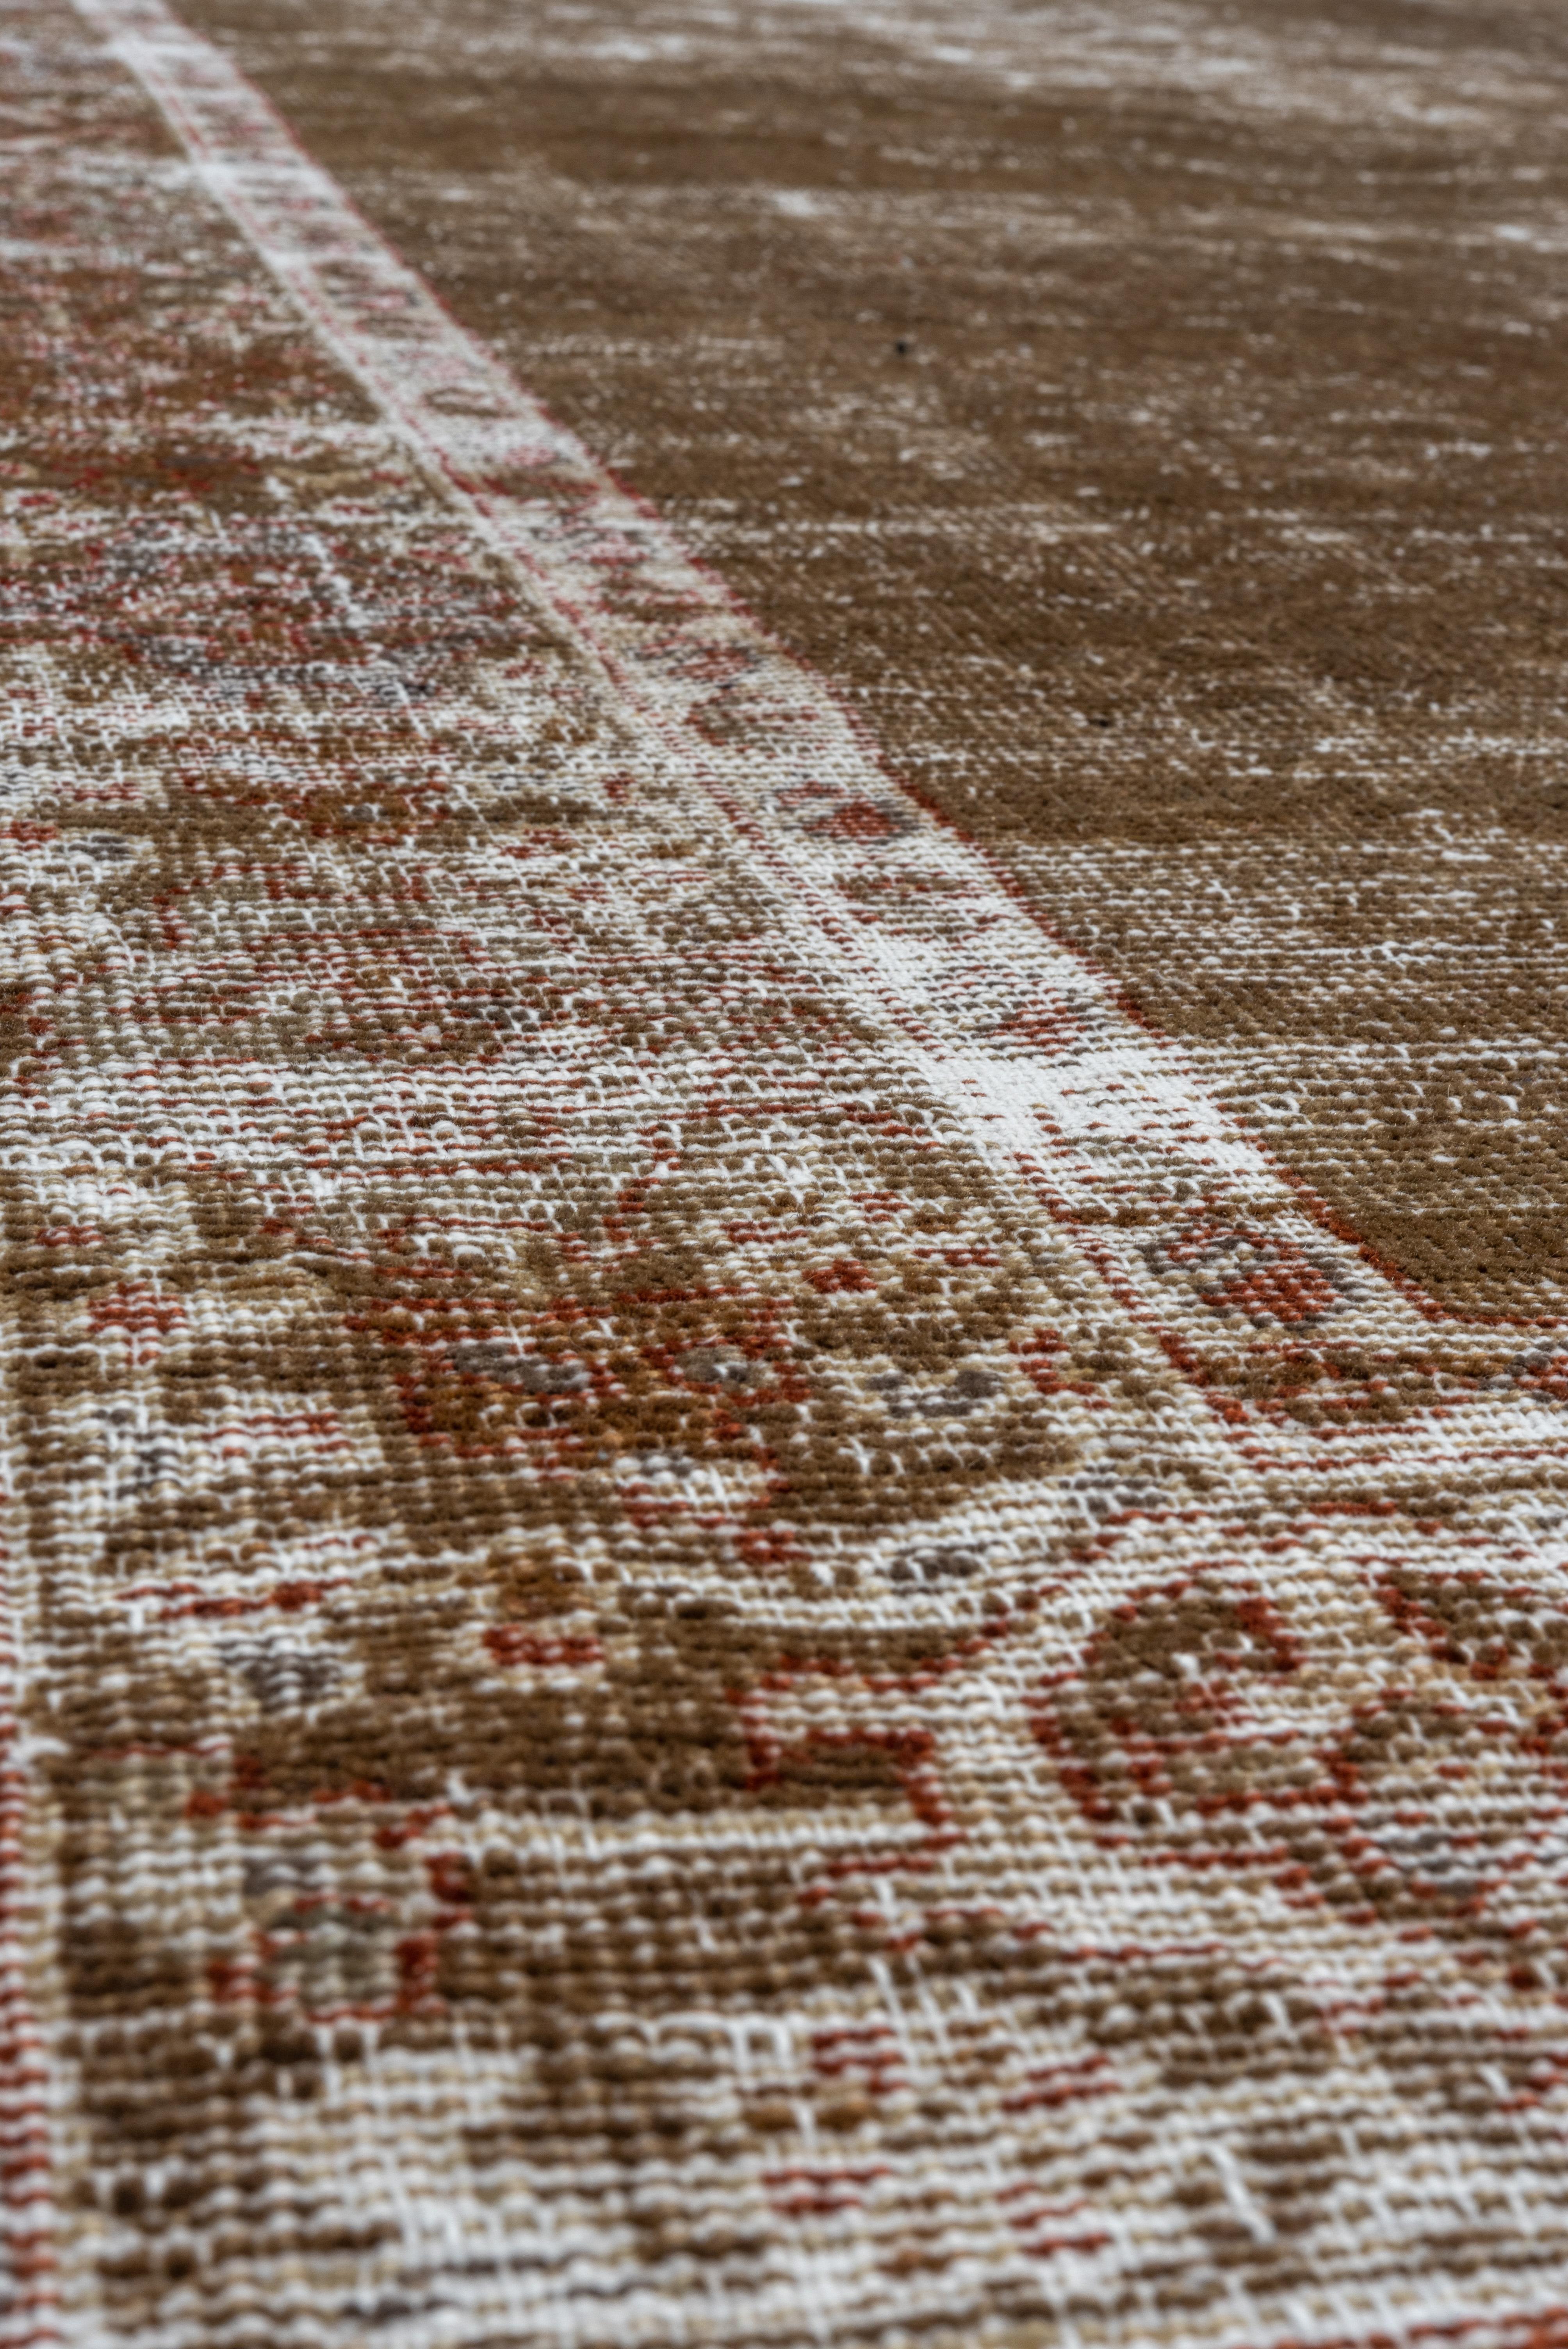 This red field west Persian rustic carpet is severely compromised with vertical wear areas right to the off-white cotton foundation.